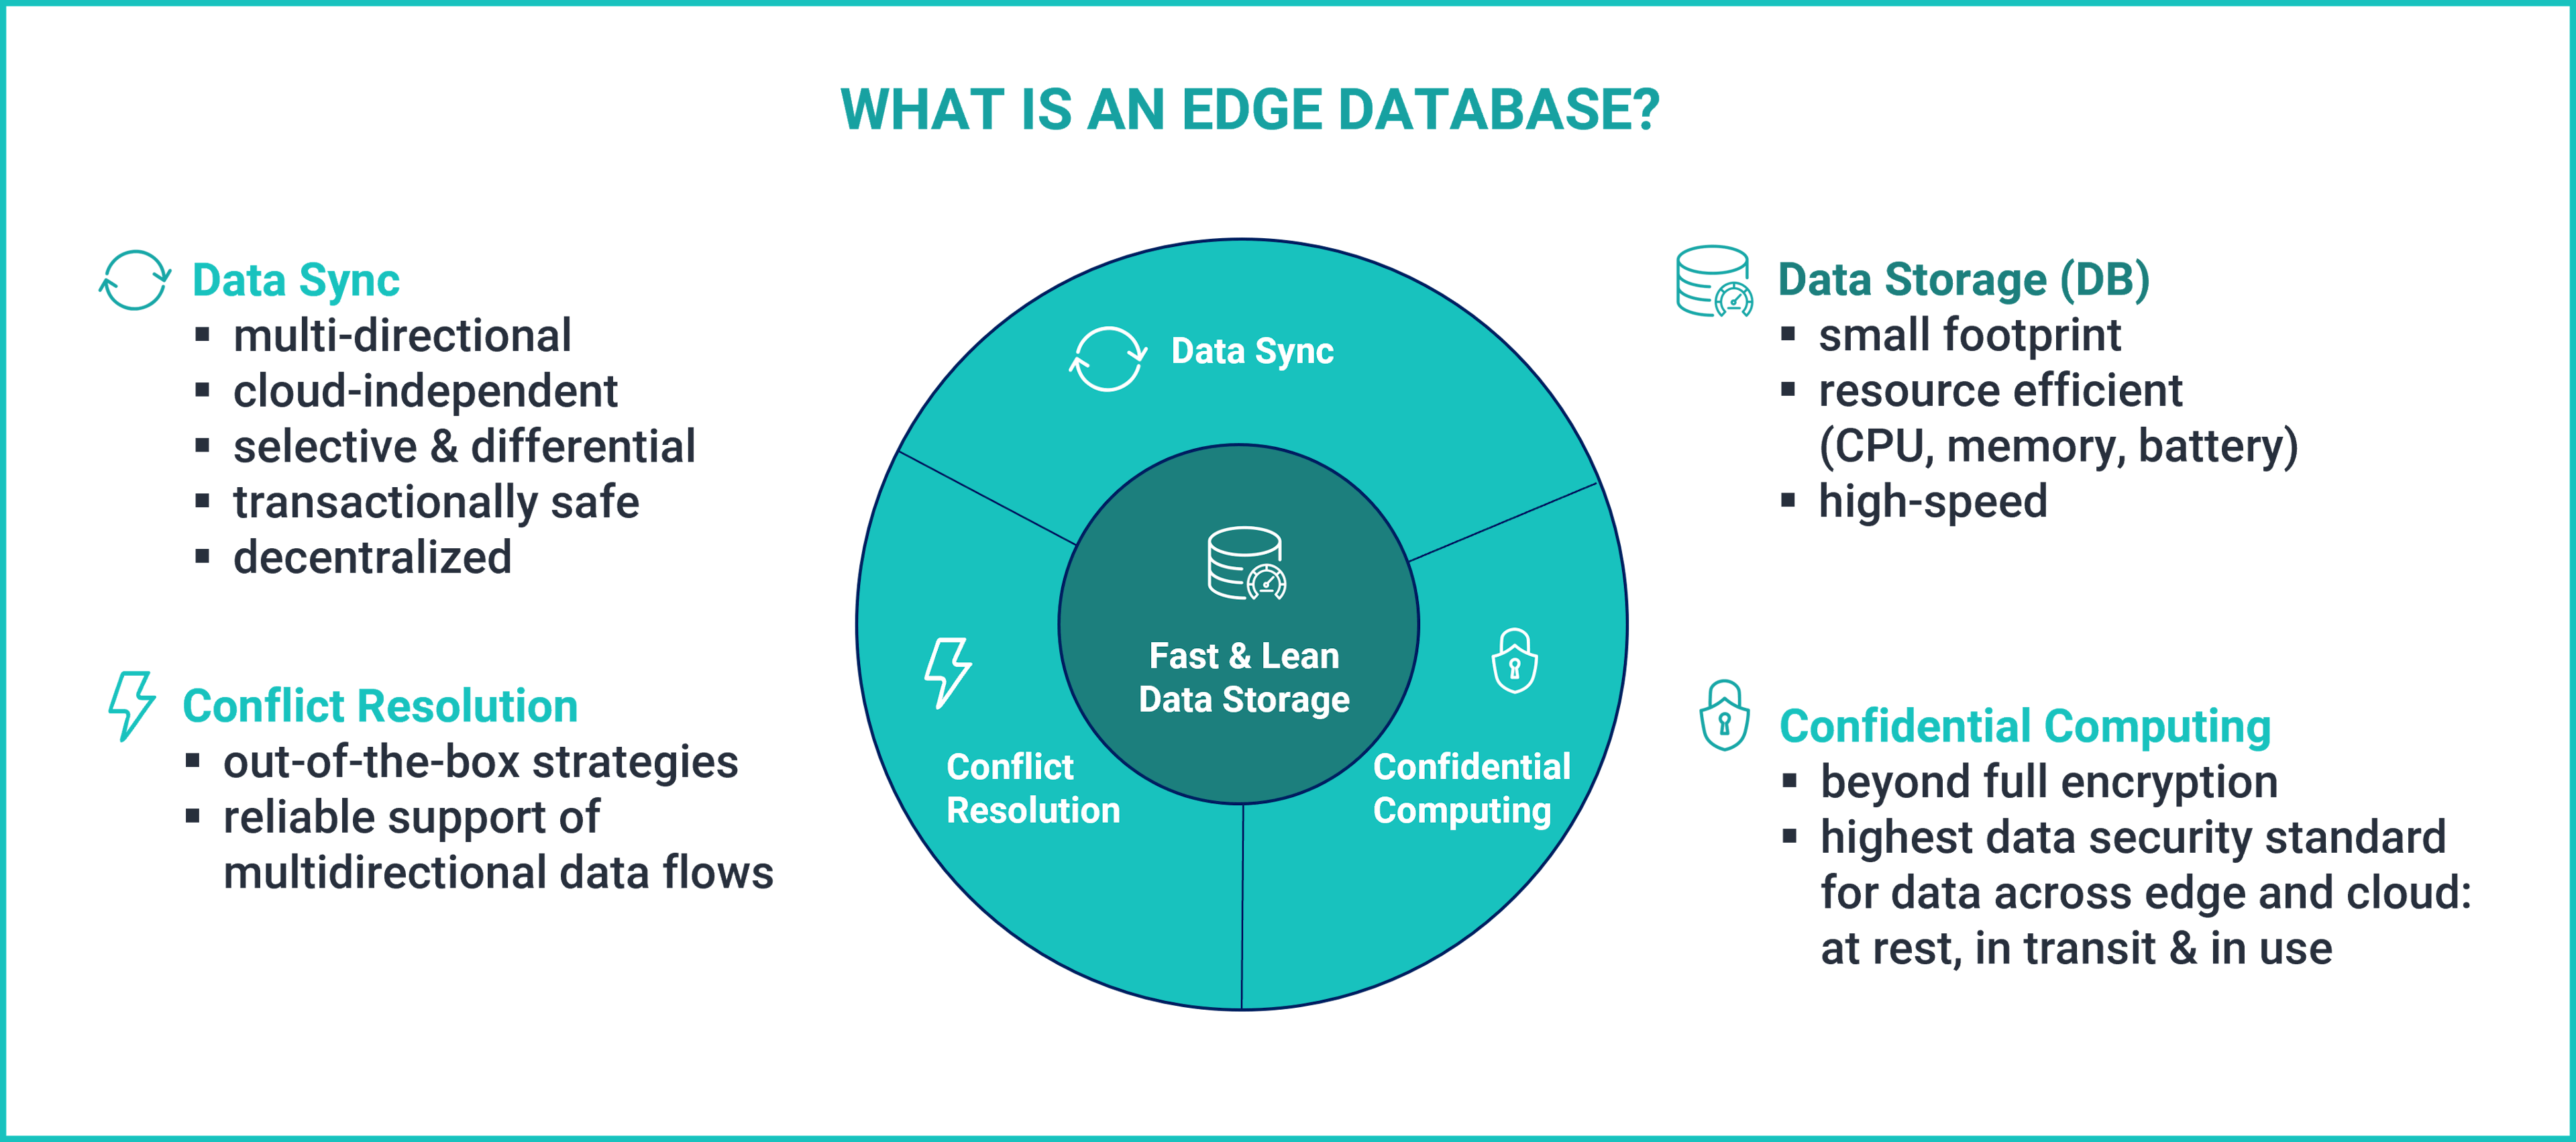 Edge Databases need to support data persistence across devices